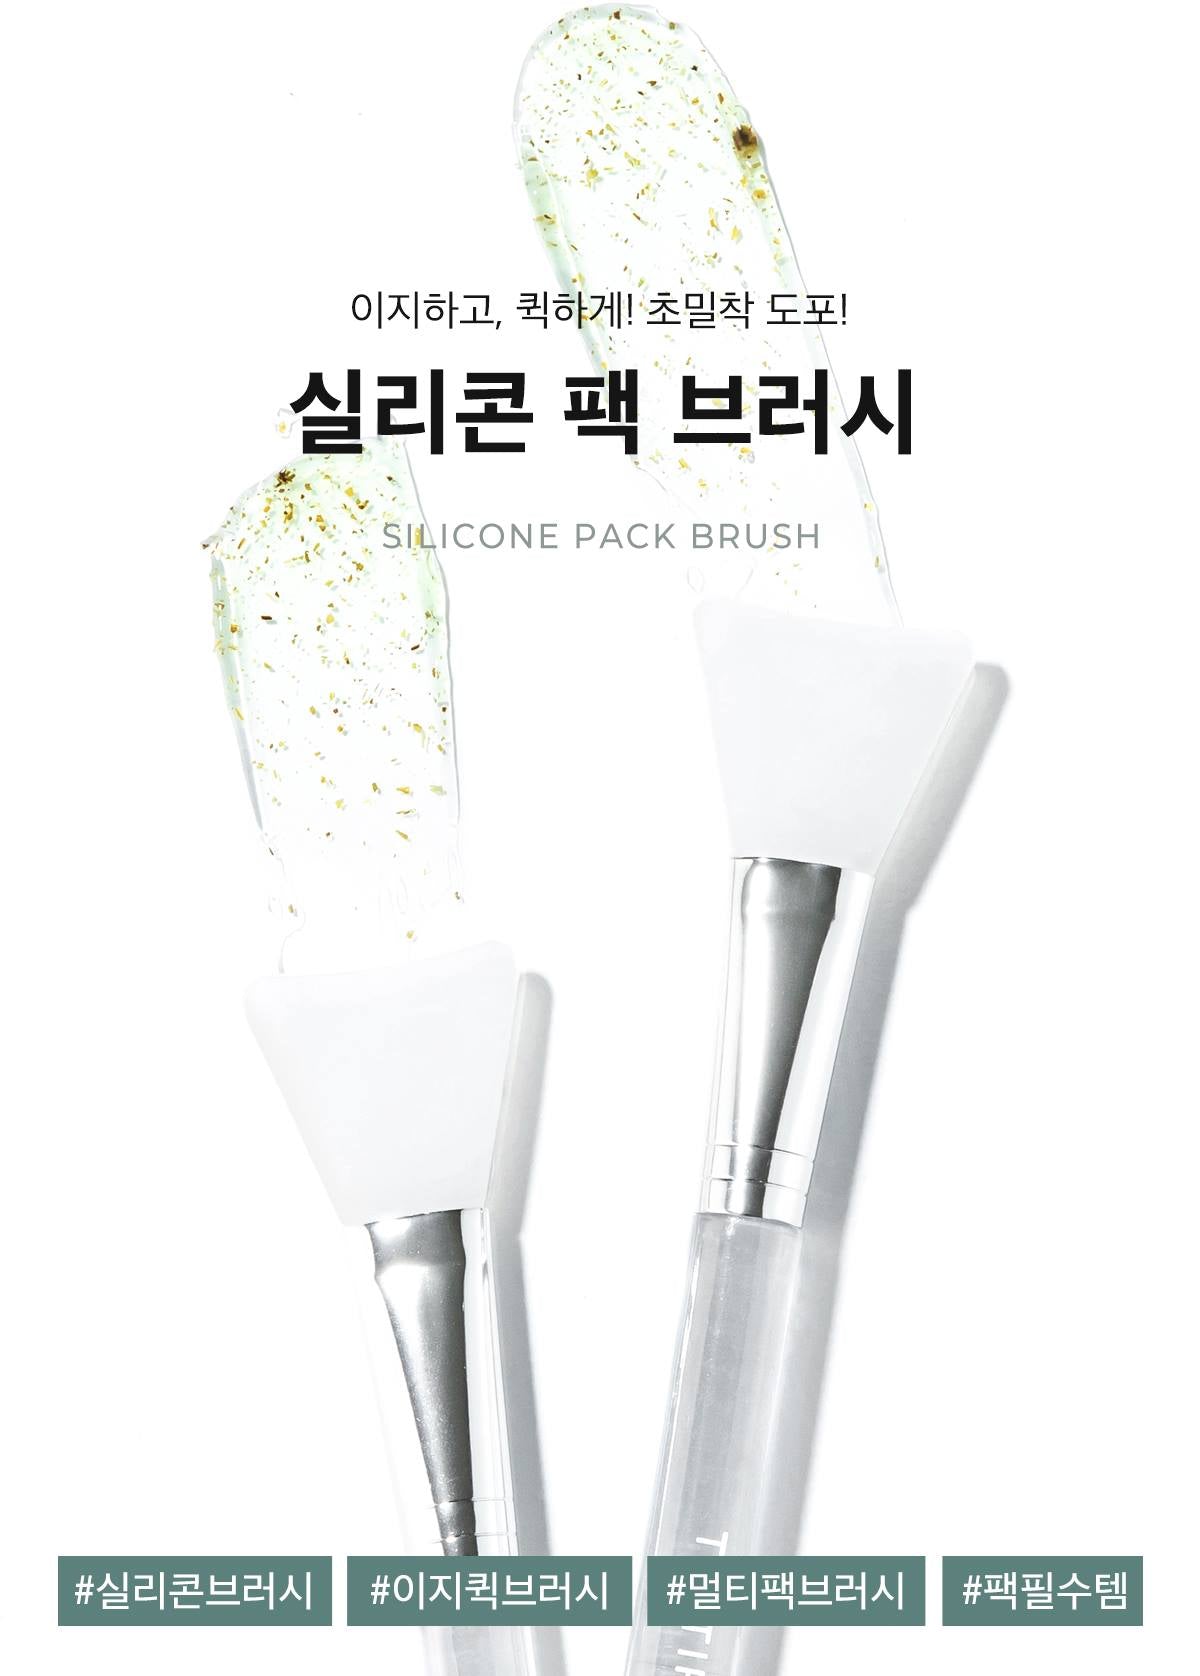 TIRTIR Silicon-based Pack Brushes Skin care Beauty Tools eco-friendly Facial Makeup